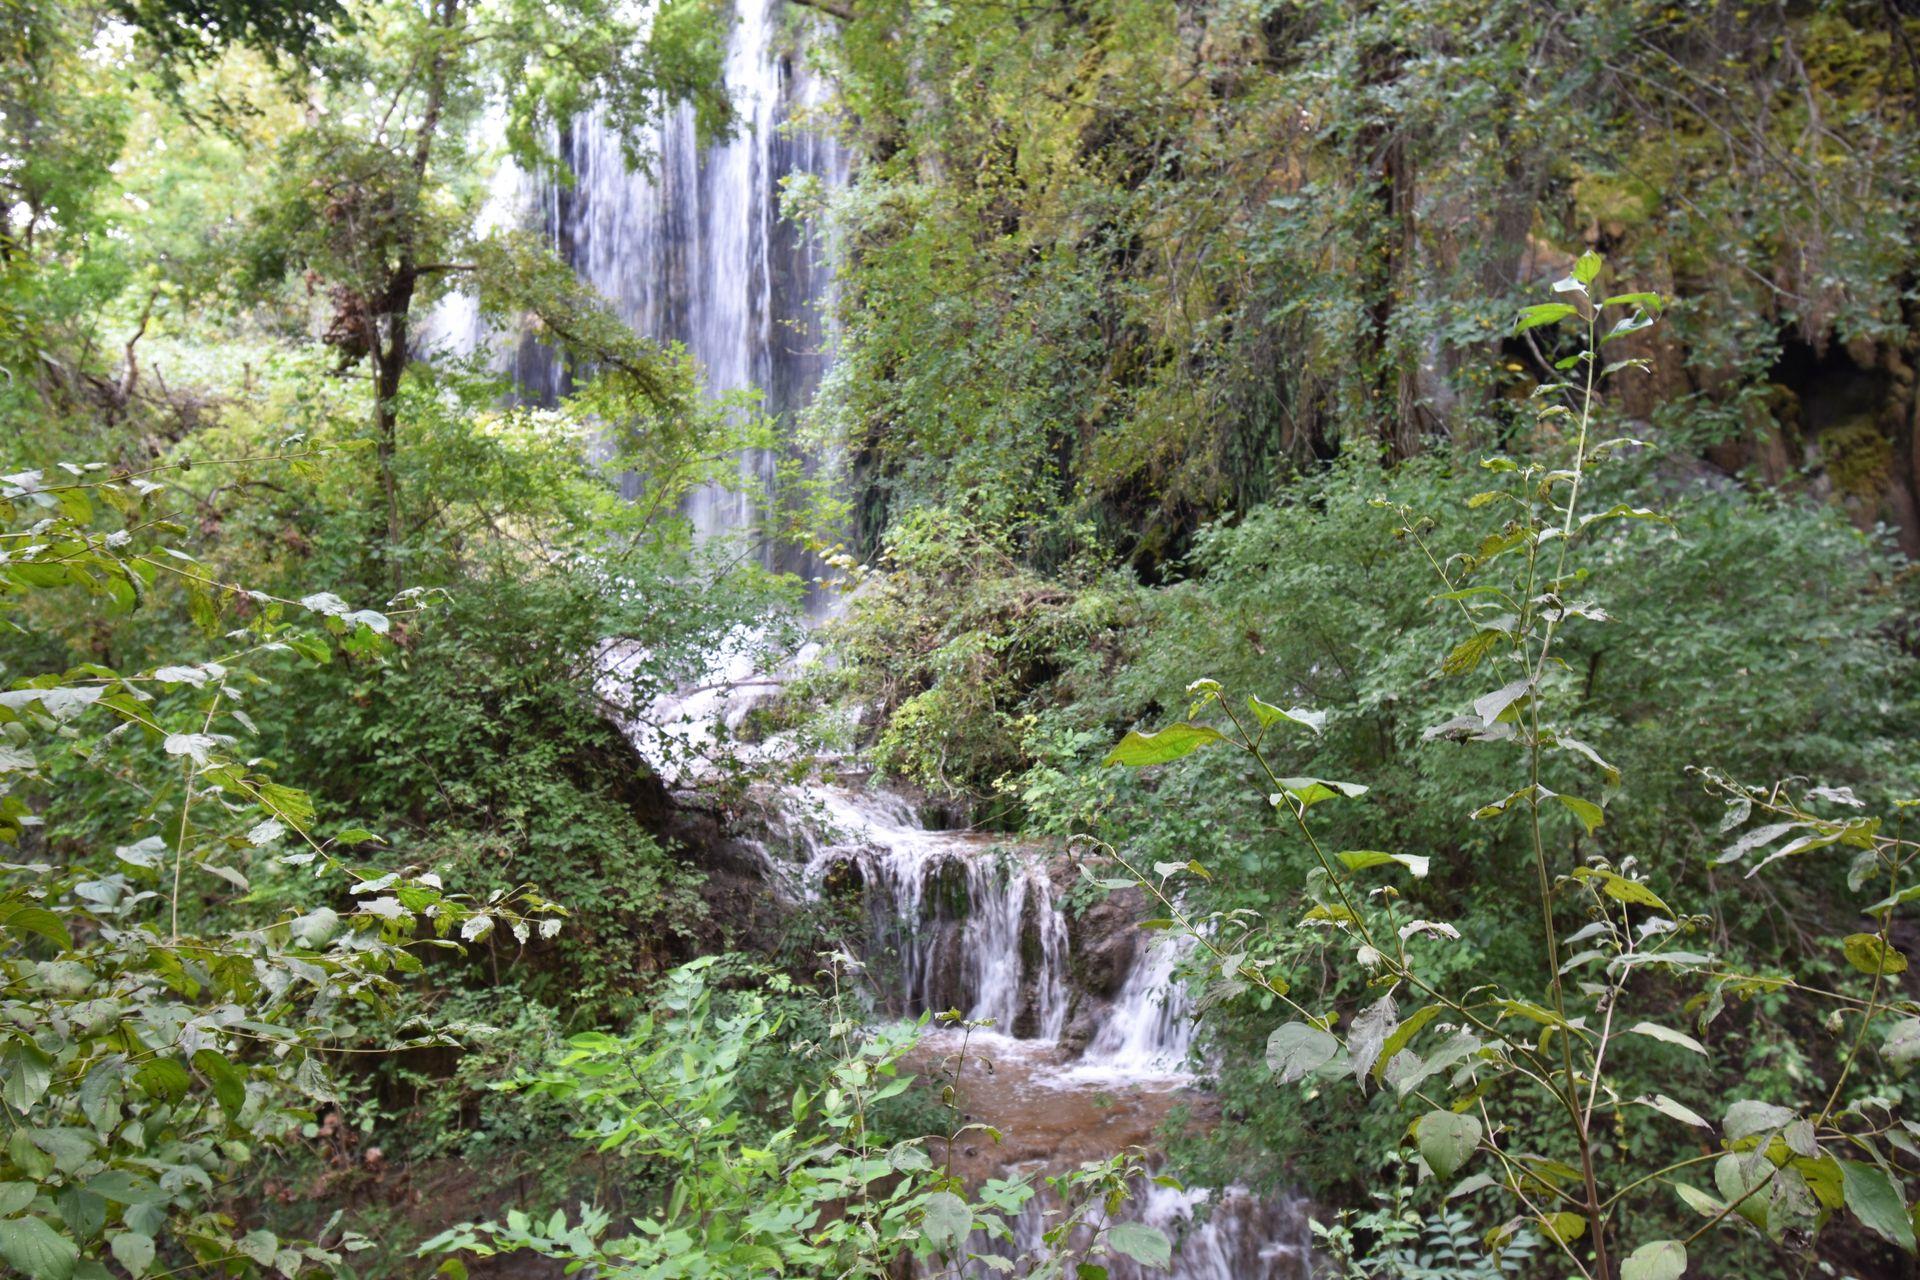 A waterfall seen through an area of greenery and trees.